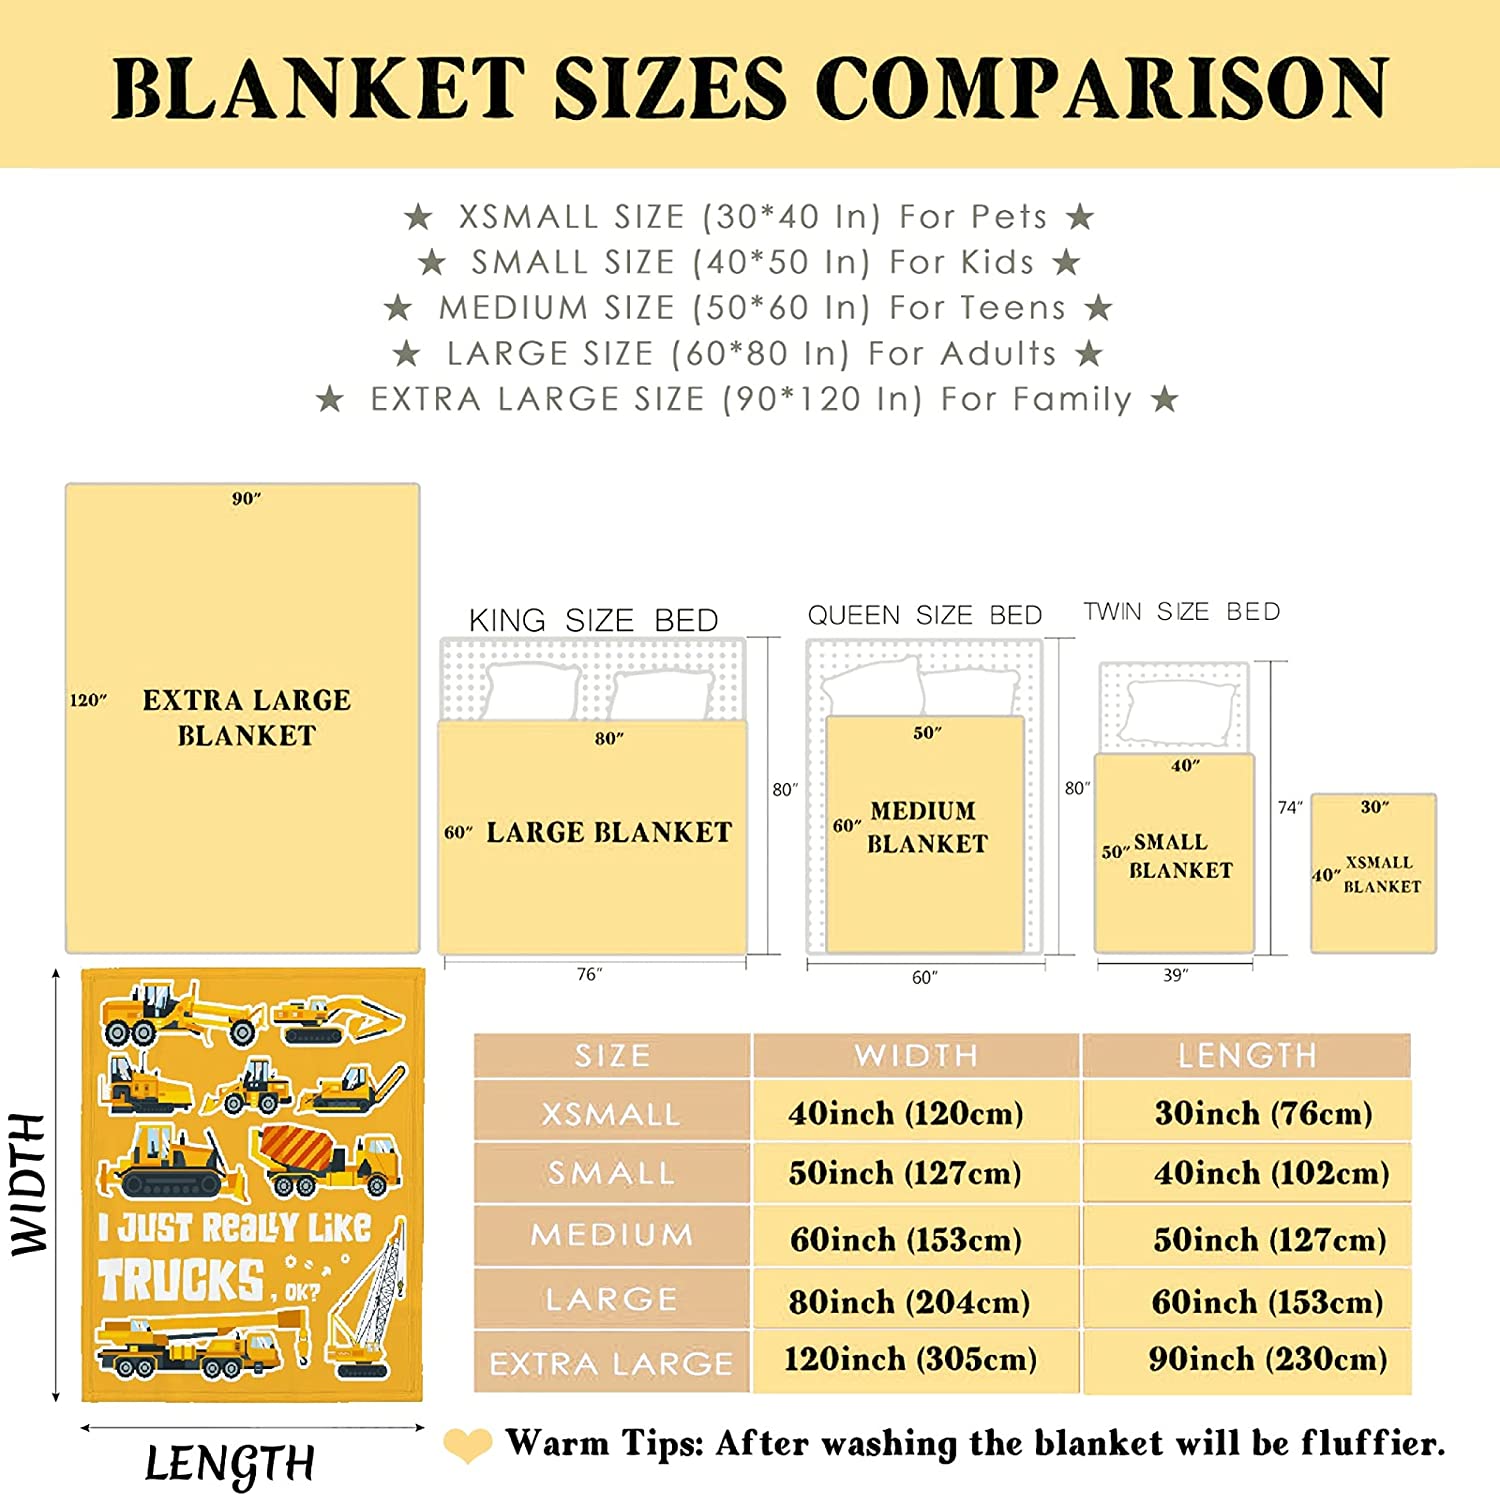 Trucks Blanket, I Just Really Like Trucks, Ok? Throw Blanket for Girls Boys Gifts, Ultral Soft Cozy Warm Flannel Fleece Suit for Sofa, Couch, Bed, Travel, Sofa 80"x60" L Blanket for Adults - image 5 of 6